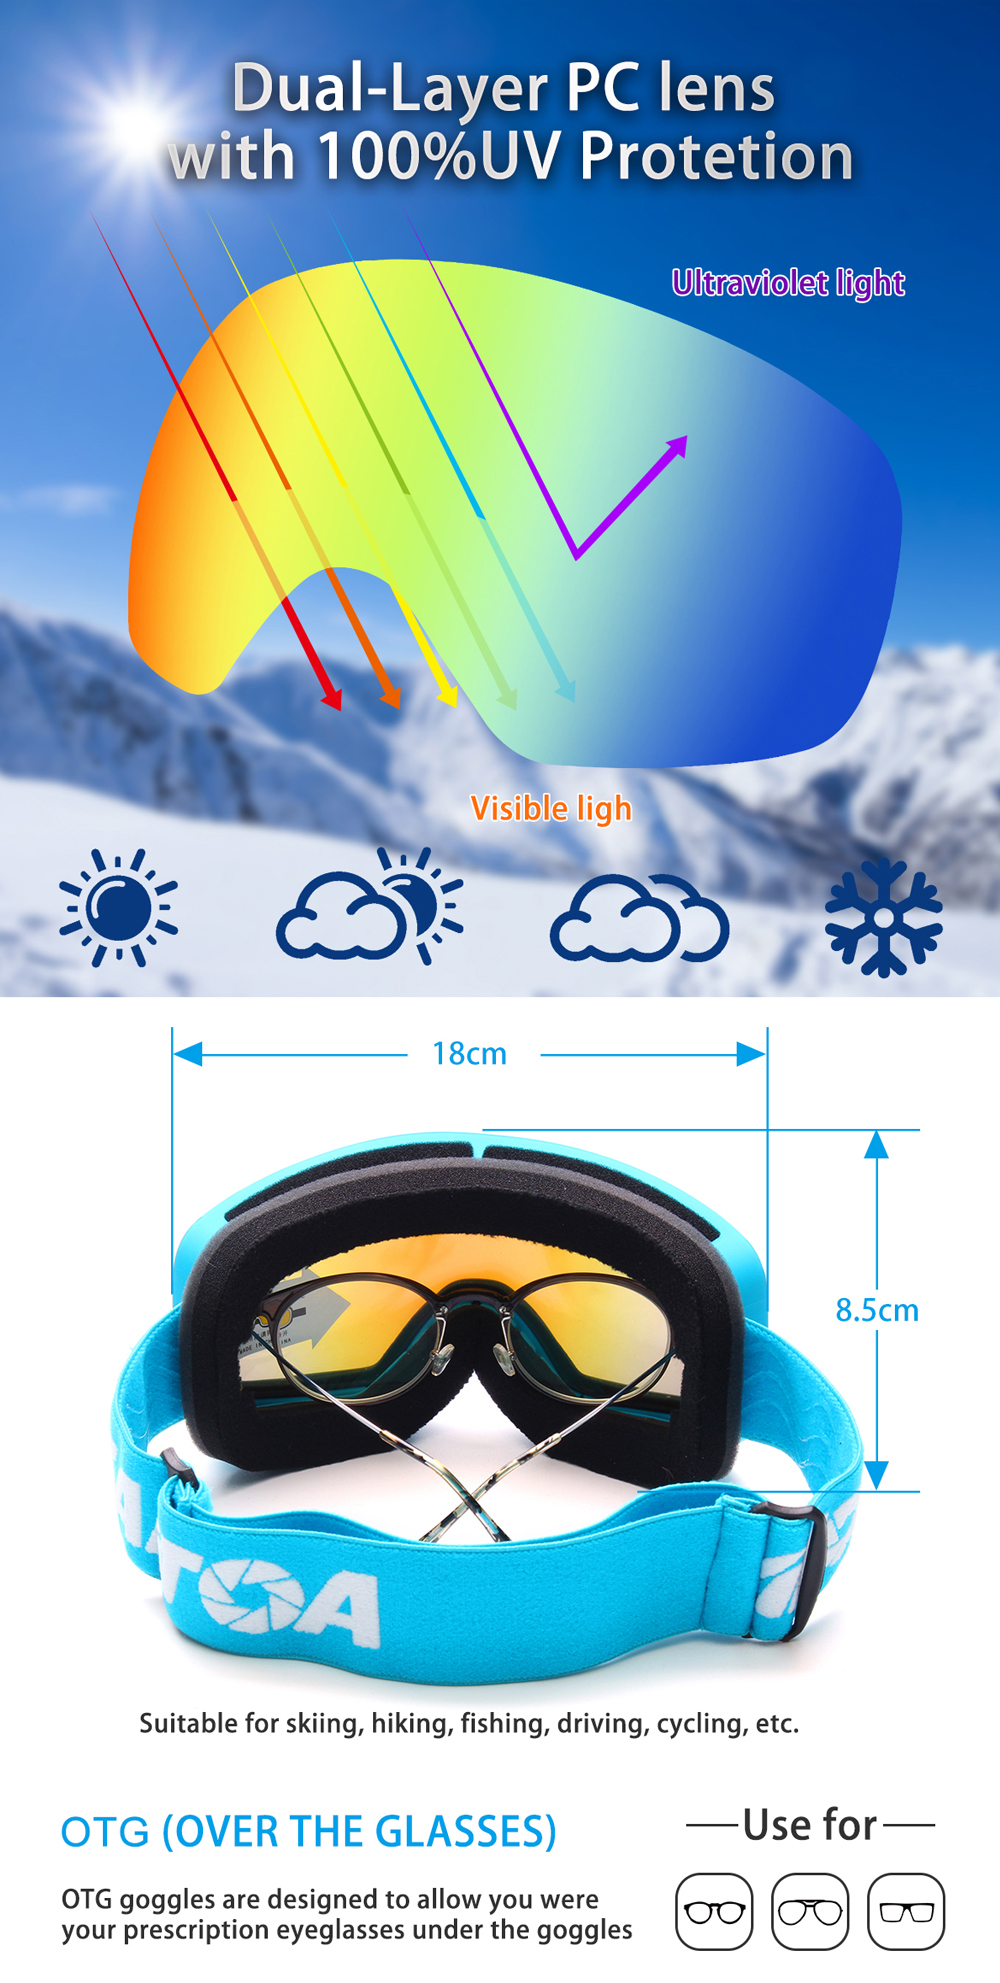 Ski-Goggles-Dual-Lens-Scratch-Resistant-Lens-TPU-Frame-Anti-Fog-UV-Protection-Protective-Goggles-1438665